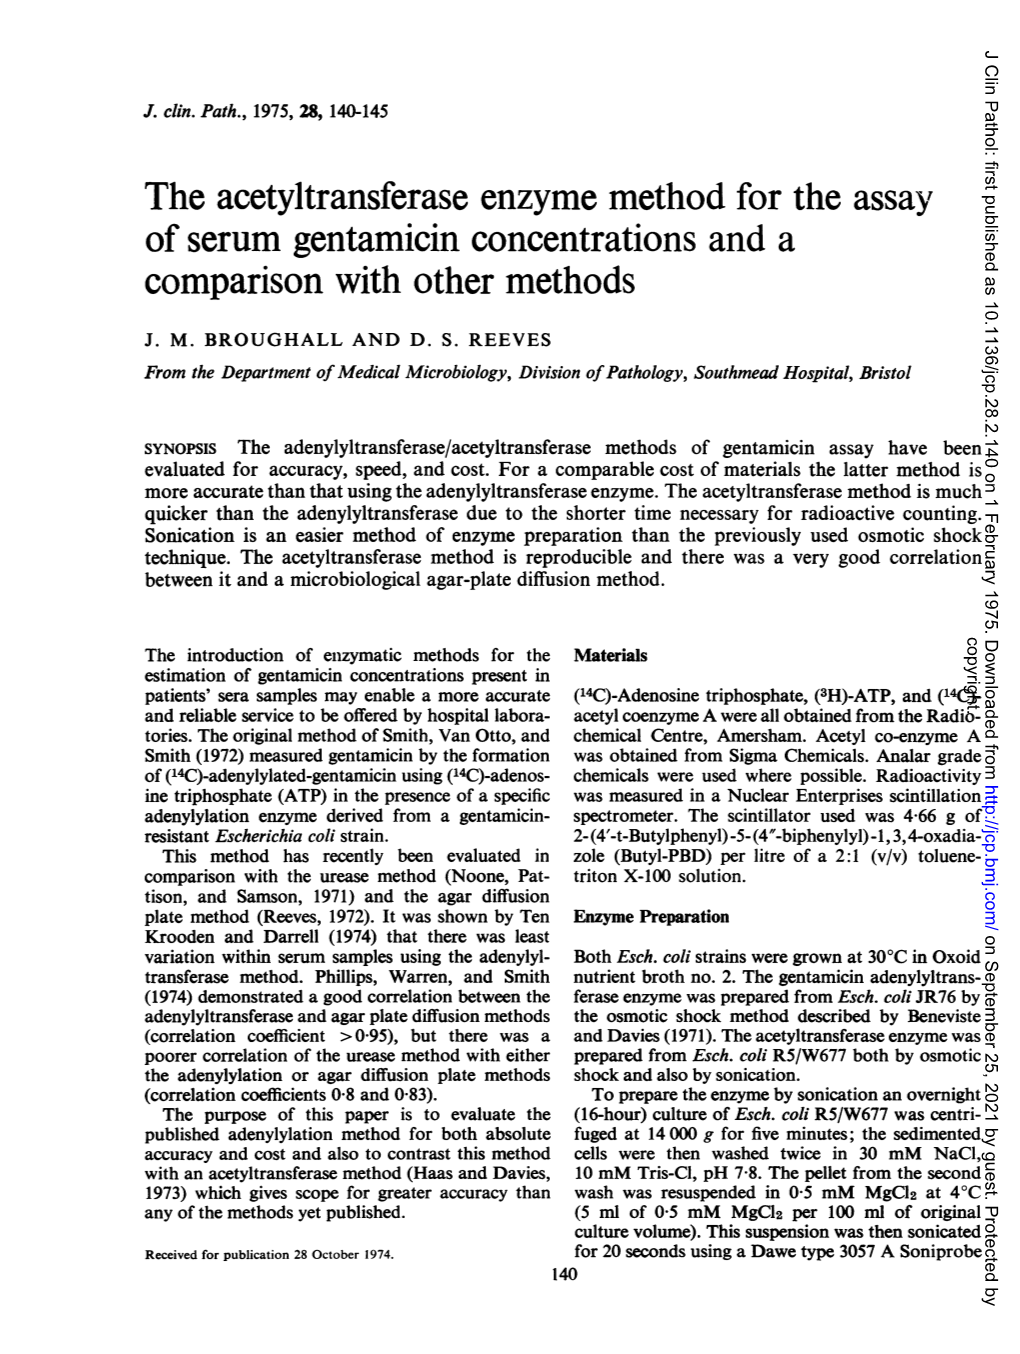 The Acetyltransferase Enzyme Method for the Assay Ofserum Gentamicin